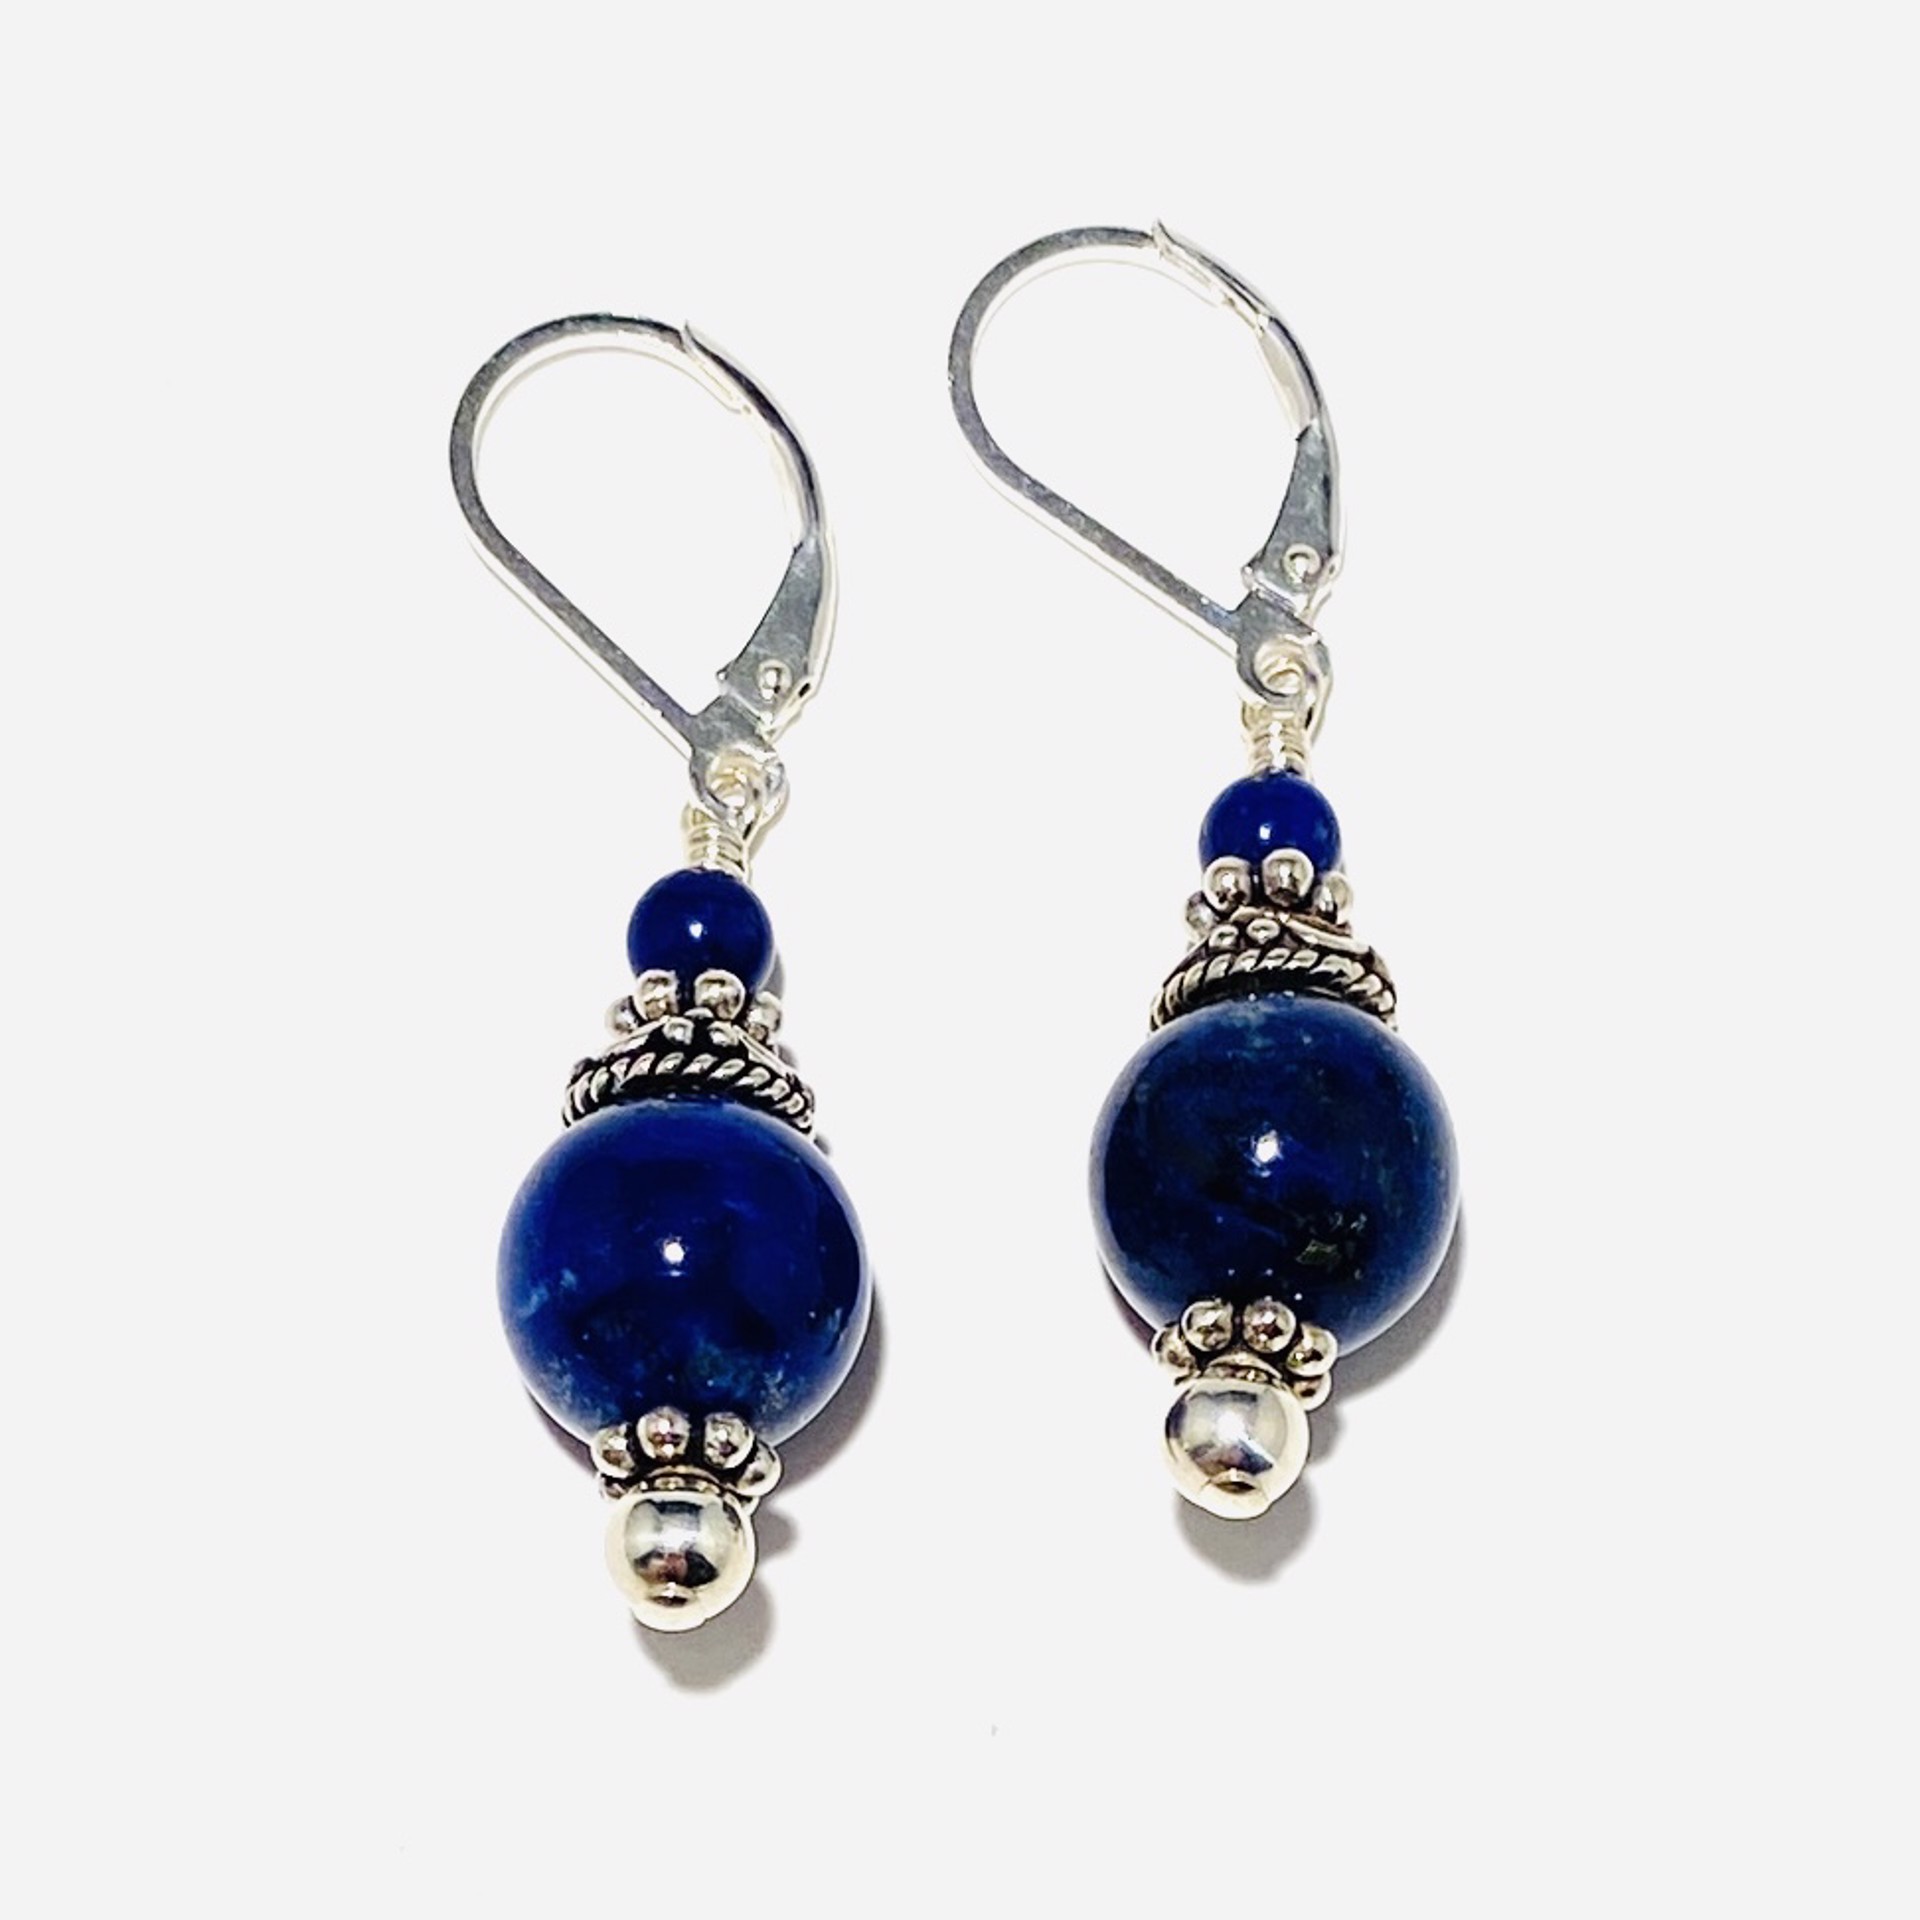 Lapis and Bali Sterling Earrings SHOSH23-18 by Shoshannah Weinisch